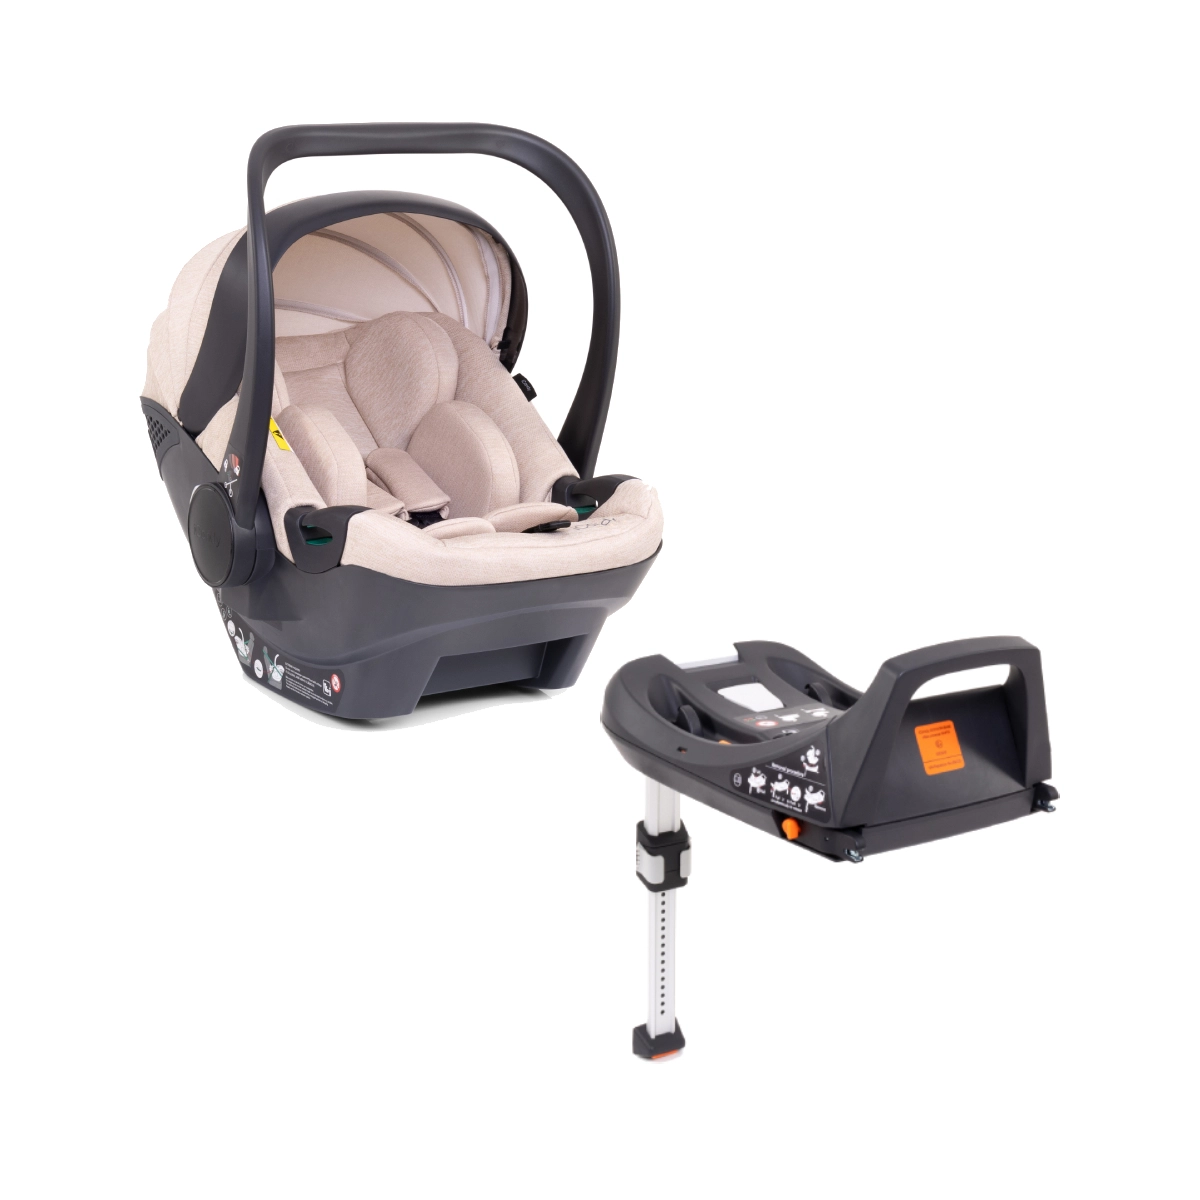 iCandy Cocoon Infant Group 0+ Car Seat and Isofix Base